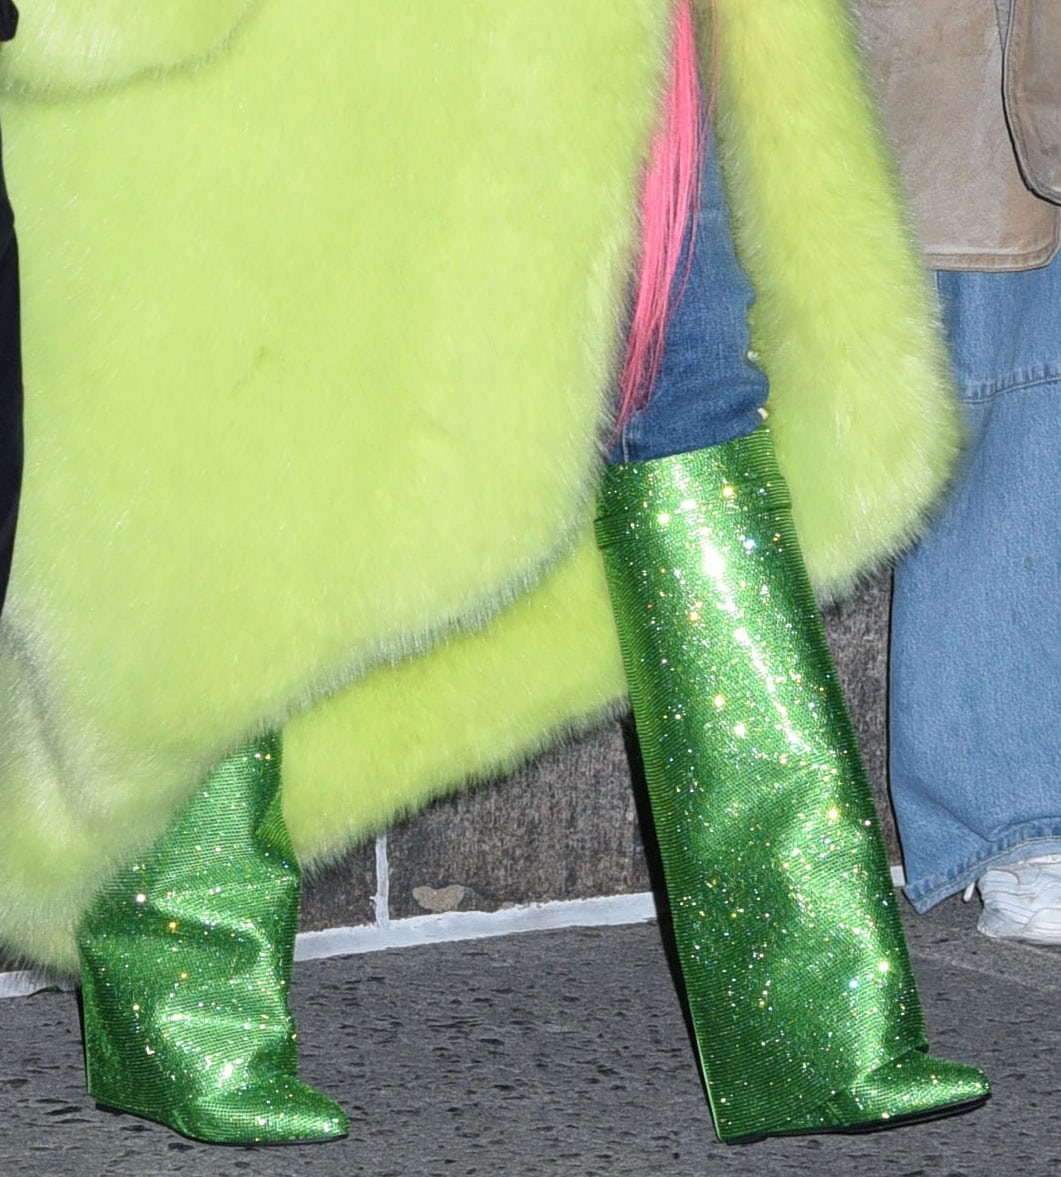 Nicki Minaj completes her colorful winter look with green crystal-embellished Shark Lock knee-high boots by Givenchy